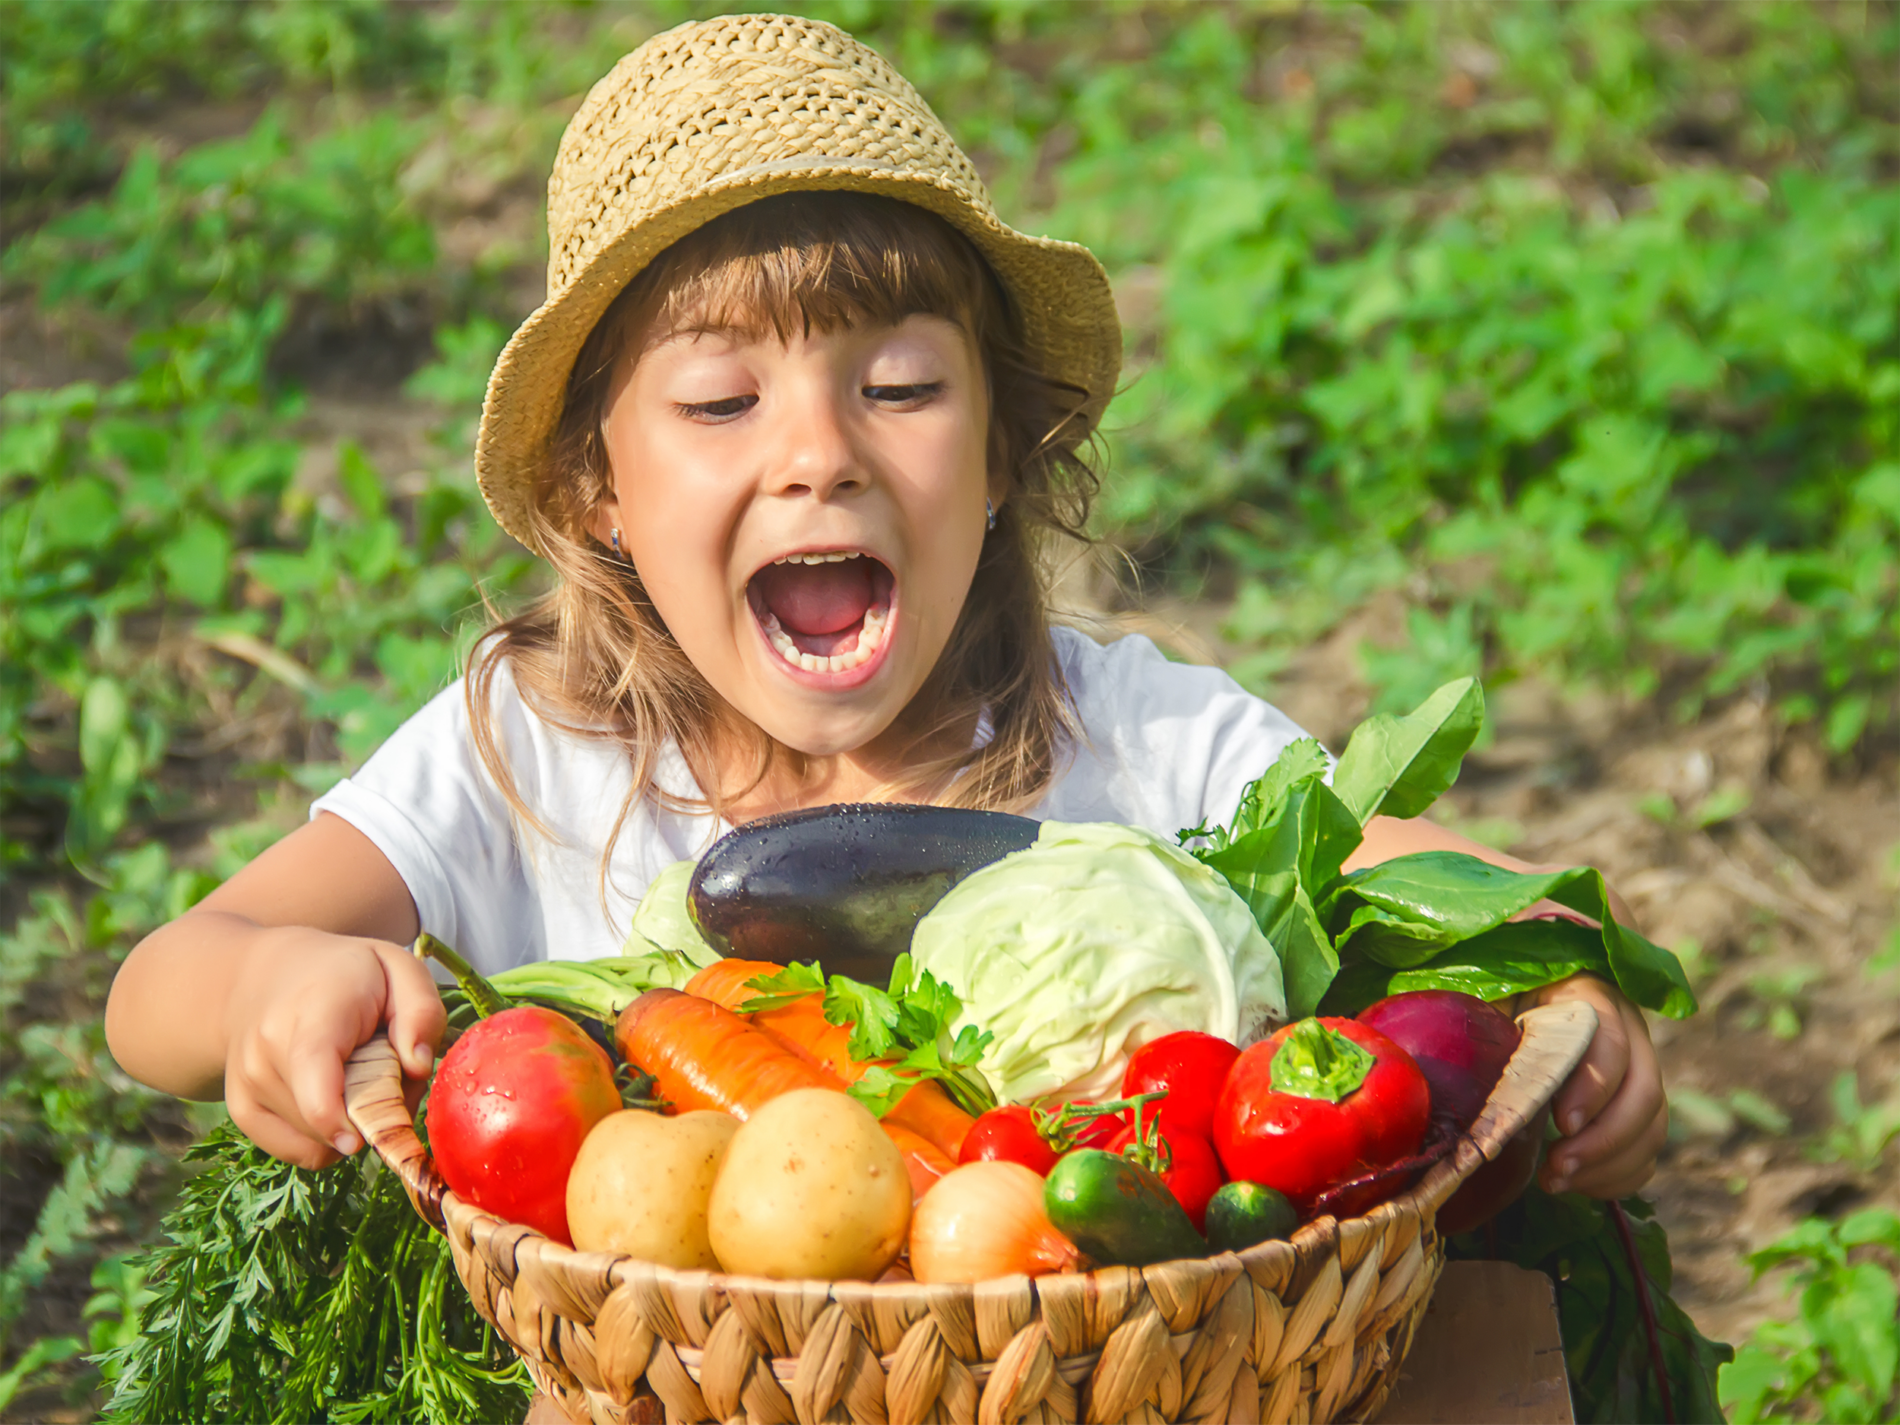 Child with a basket full of fresh veggies